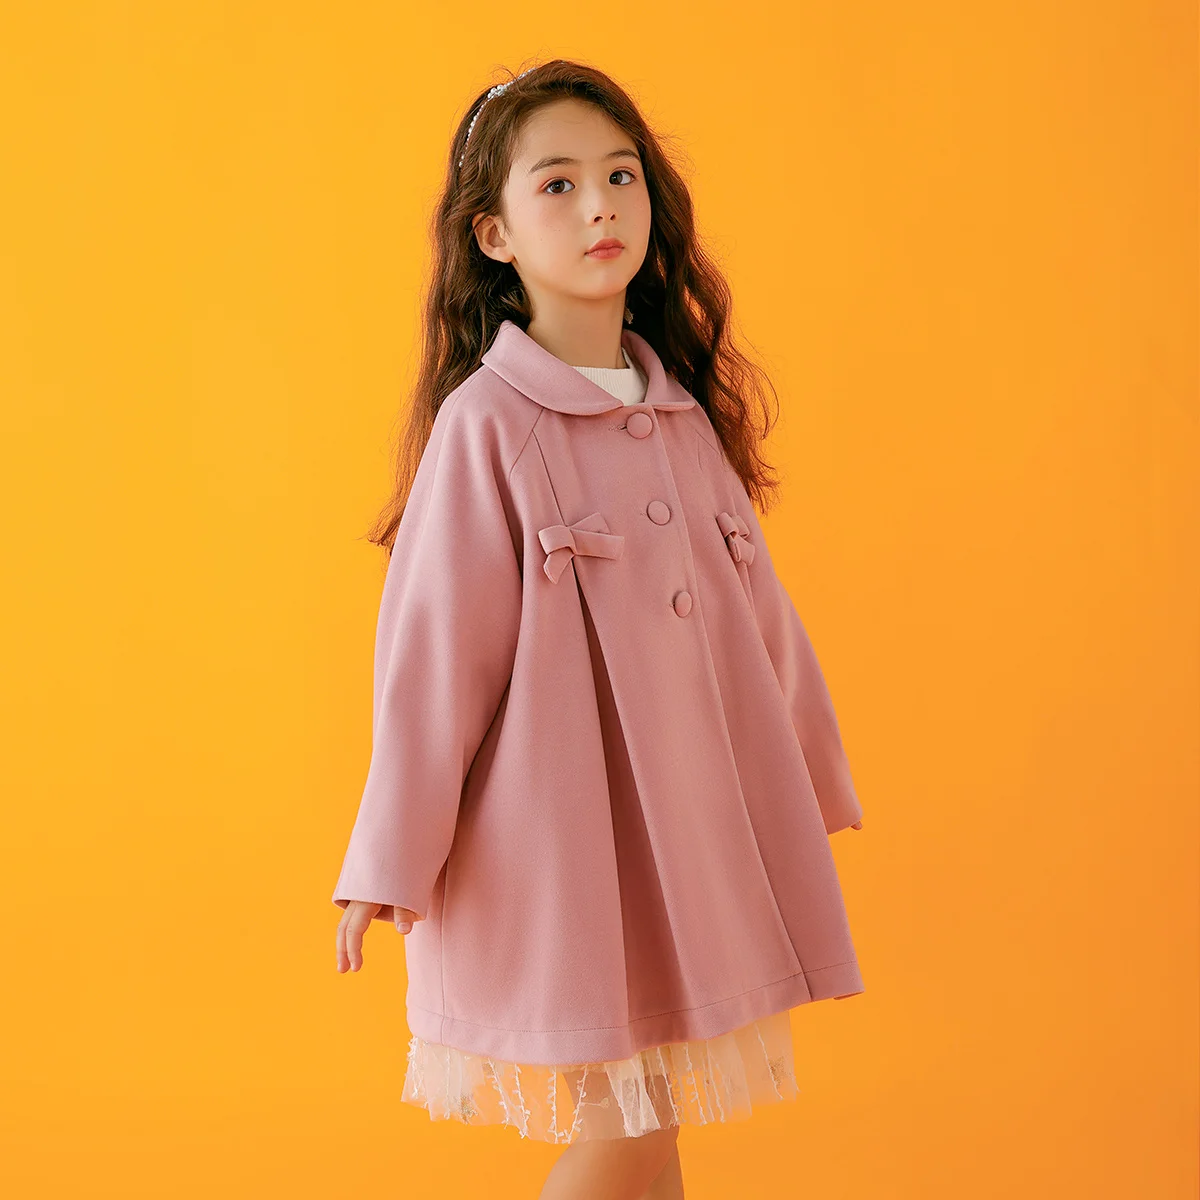 Baby Girls Full Sleeve Coats Fashion Kids Clothes 10% Cotton 2022 Autumn Single Breasted Pink Bowknot Cute Child Outerwear 150cm